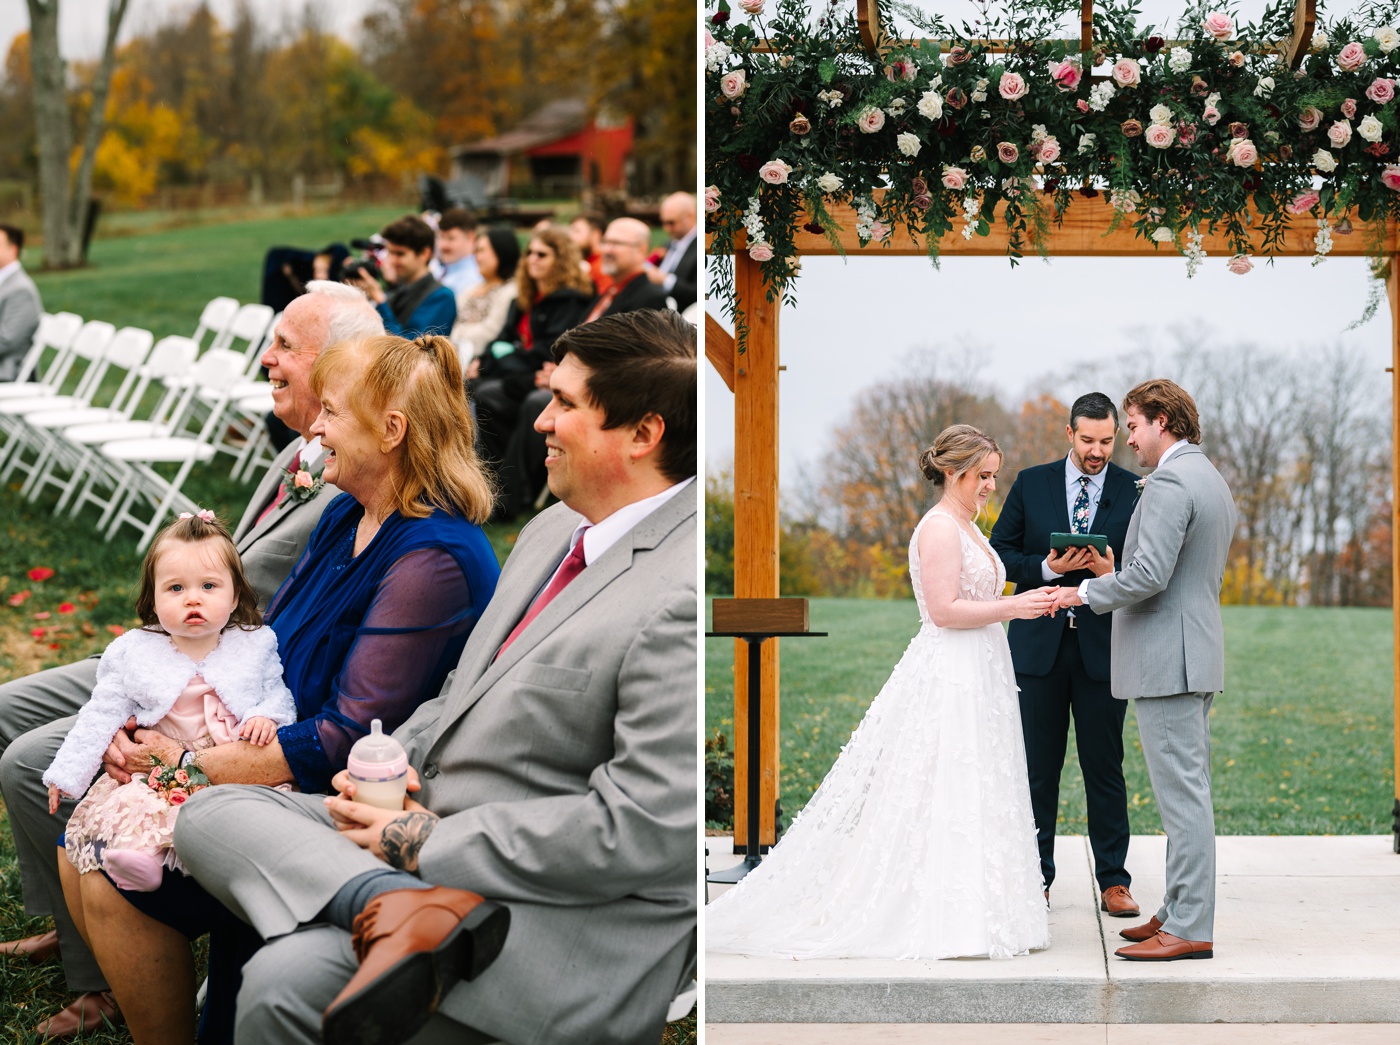 Fall outdoor wedding ceremony at Whippoorwill Hill